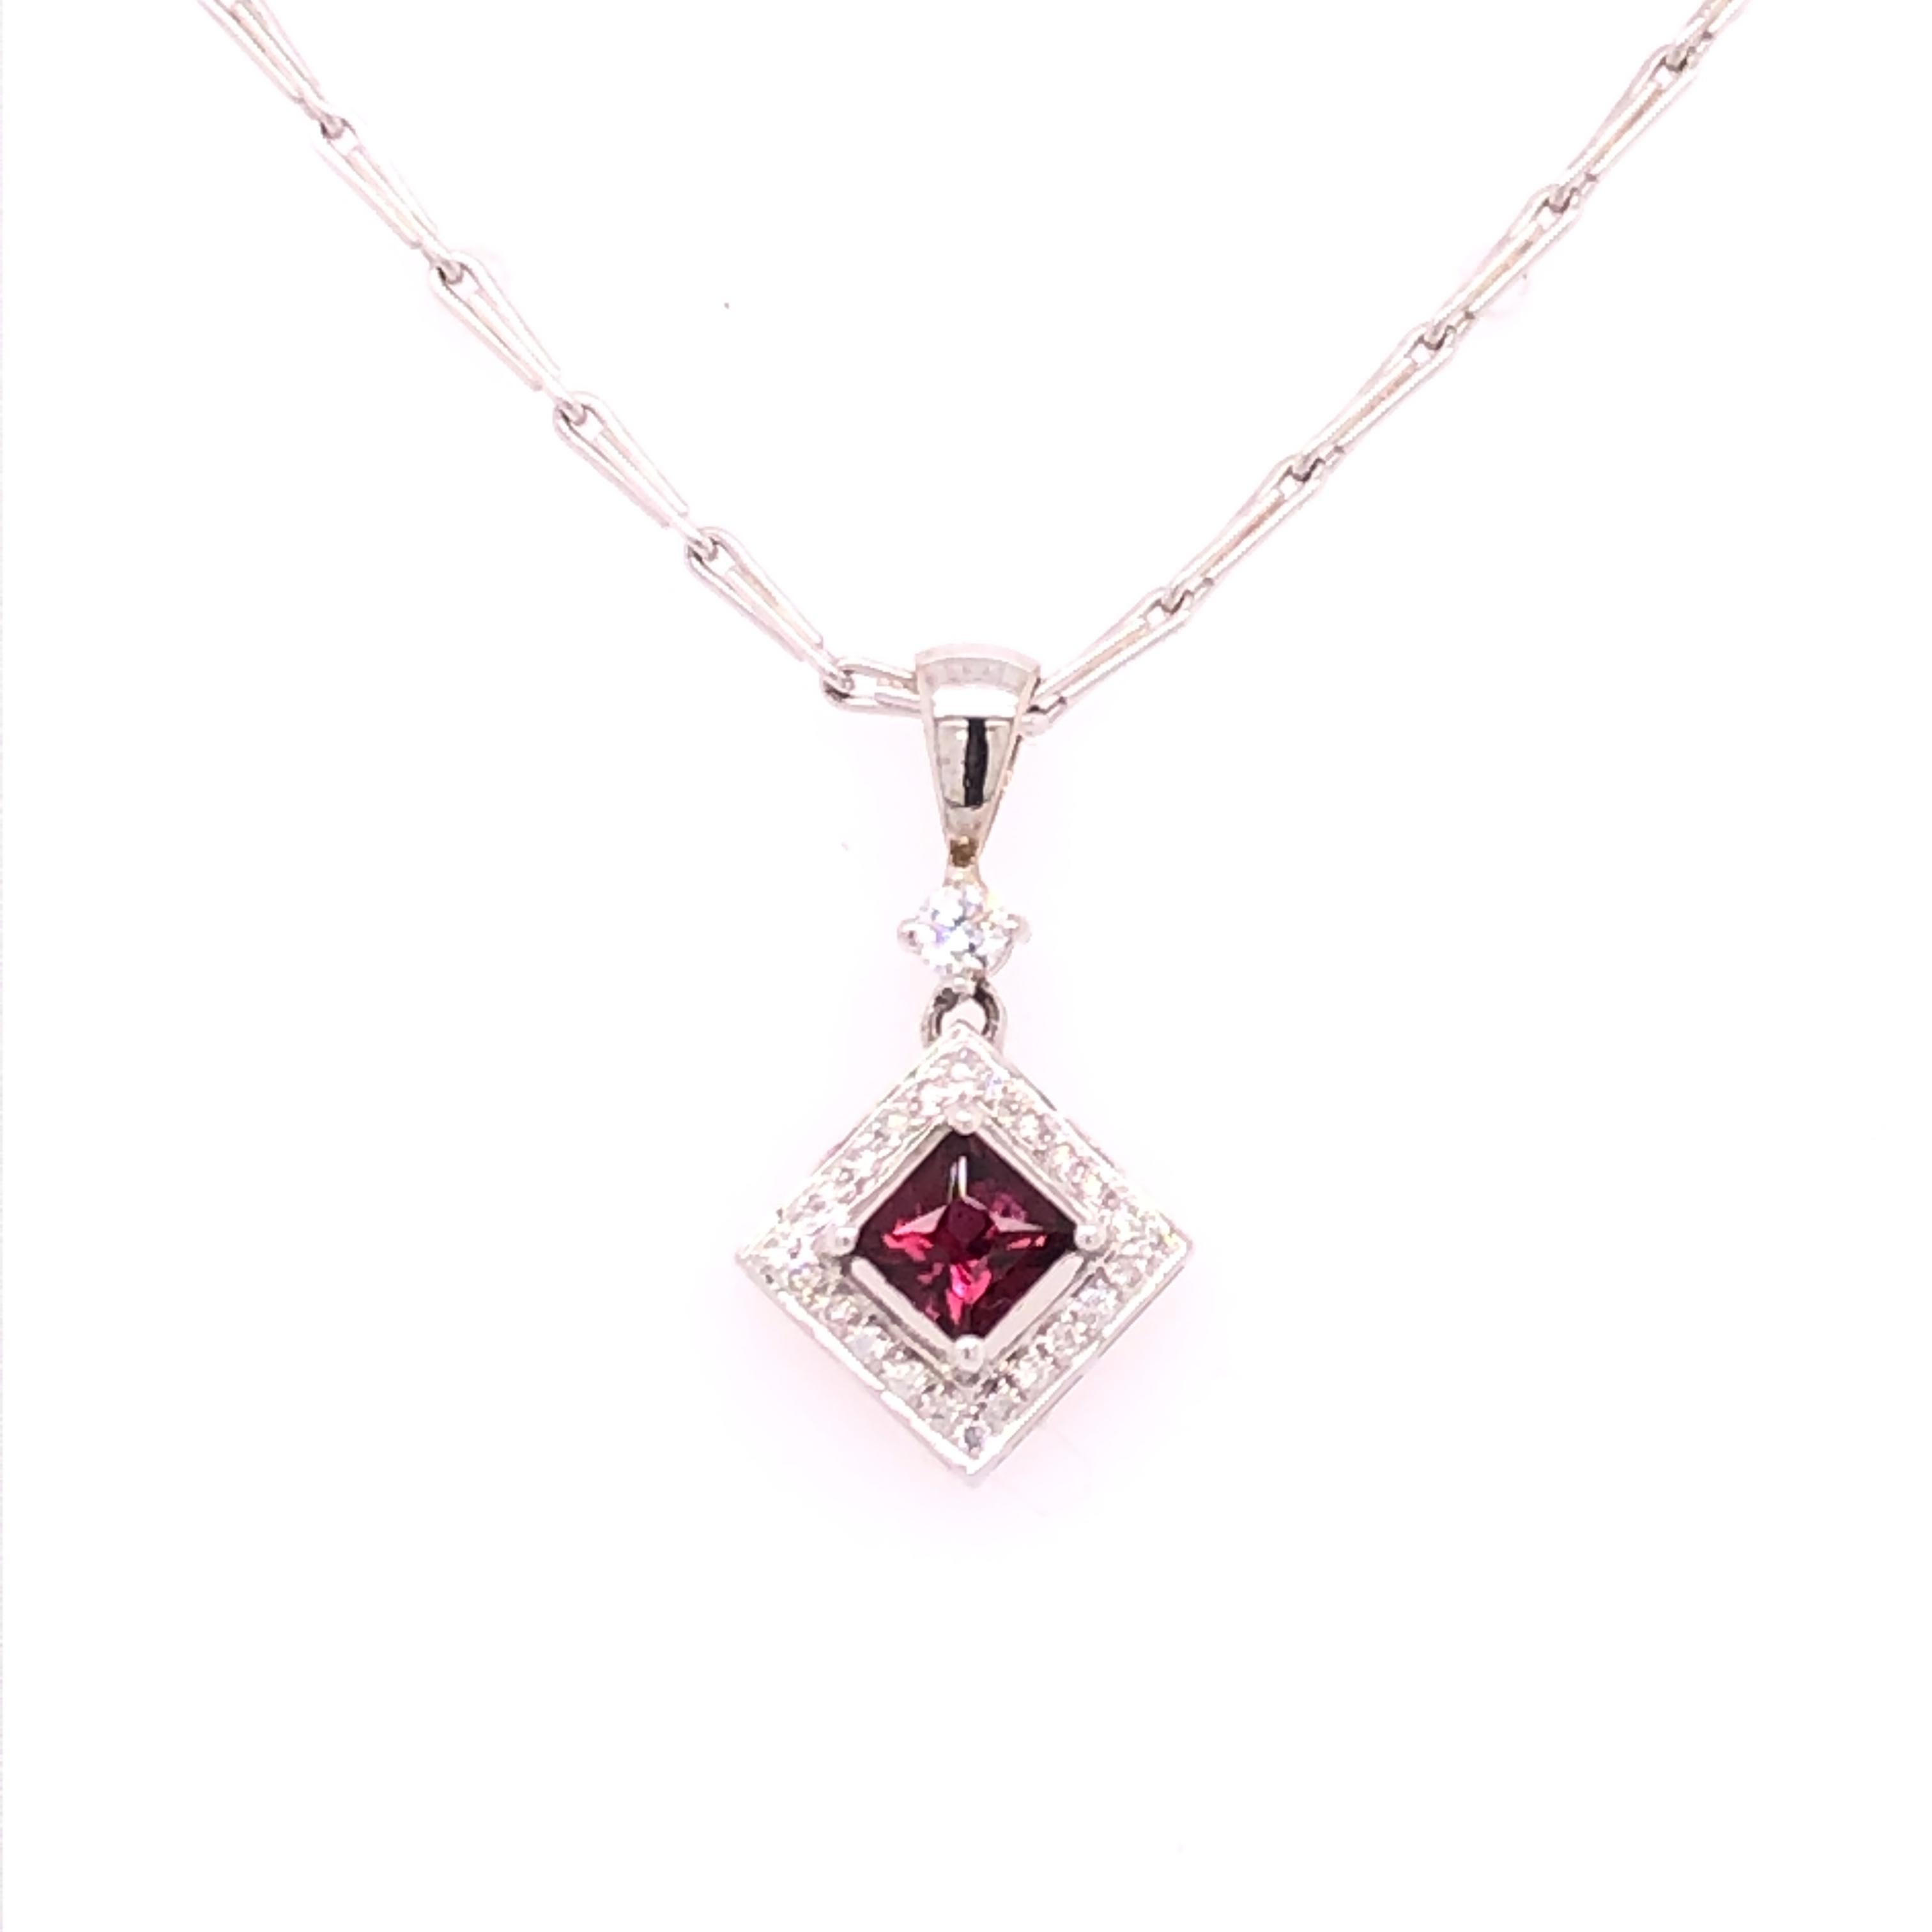 Set on its points, this princess cut pink sapphire surrounding by diamonds in a 14K white pendant drop is a beautiful example of an everyday necklace. The Sapphire is approximately 0.46 CT and the diamonds are an approximate total weight of 0.15 CT.